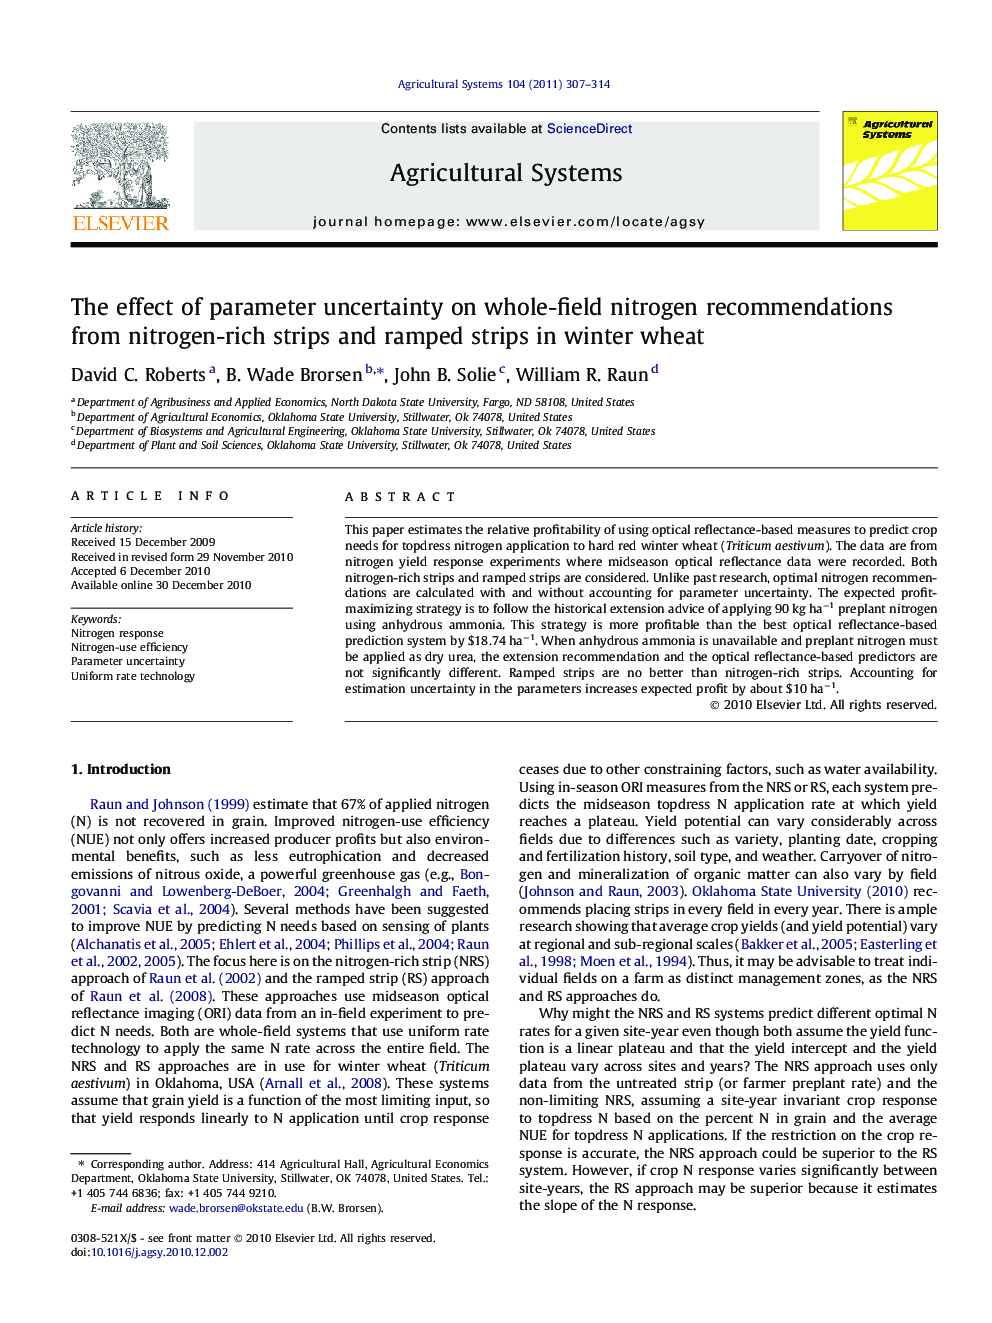 The effect of parameter uncertainty on whole-field nitrogen recommendations from nitrogen-rich strips and ramped strips in winter wheat